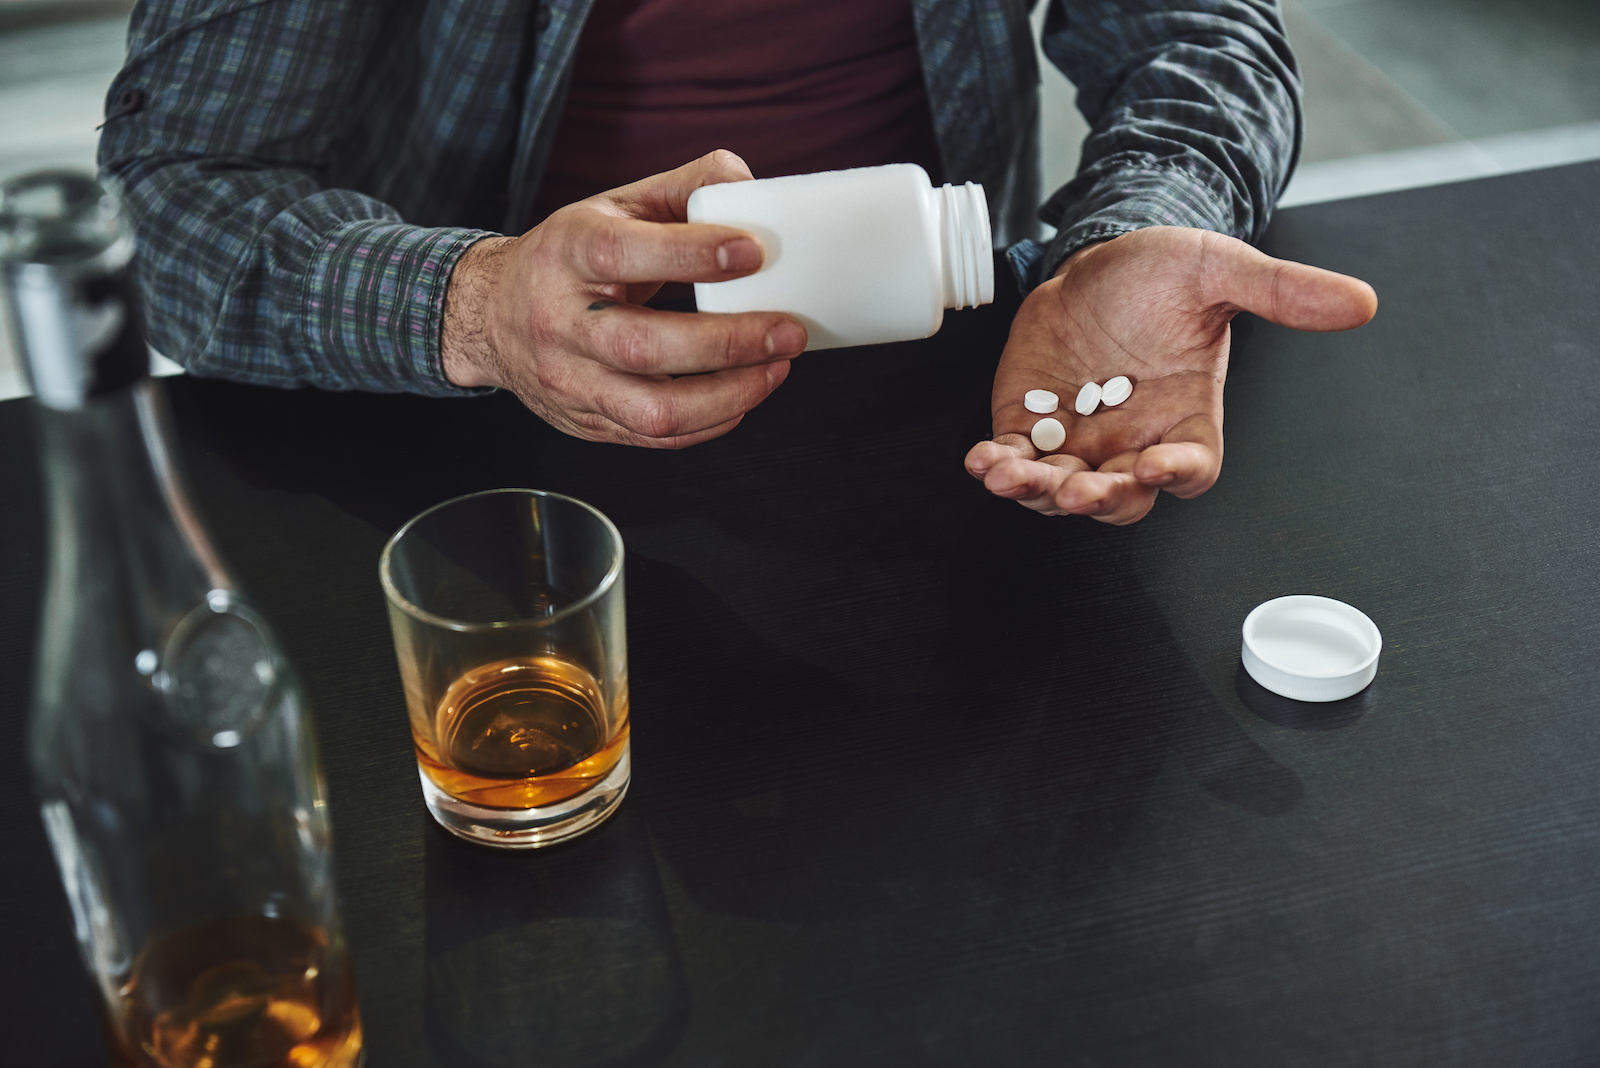 Effexor And Alcohol: What Are The Risks Of Mixing Drugs & How To Know If An Addiction Is At Hand